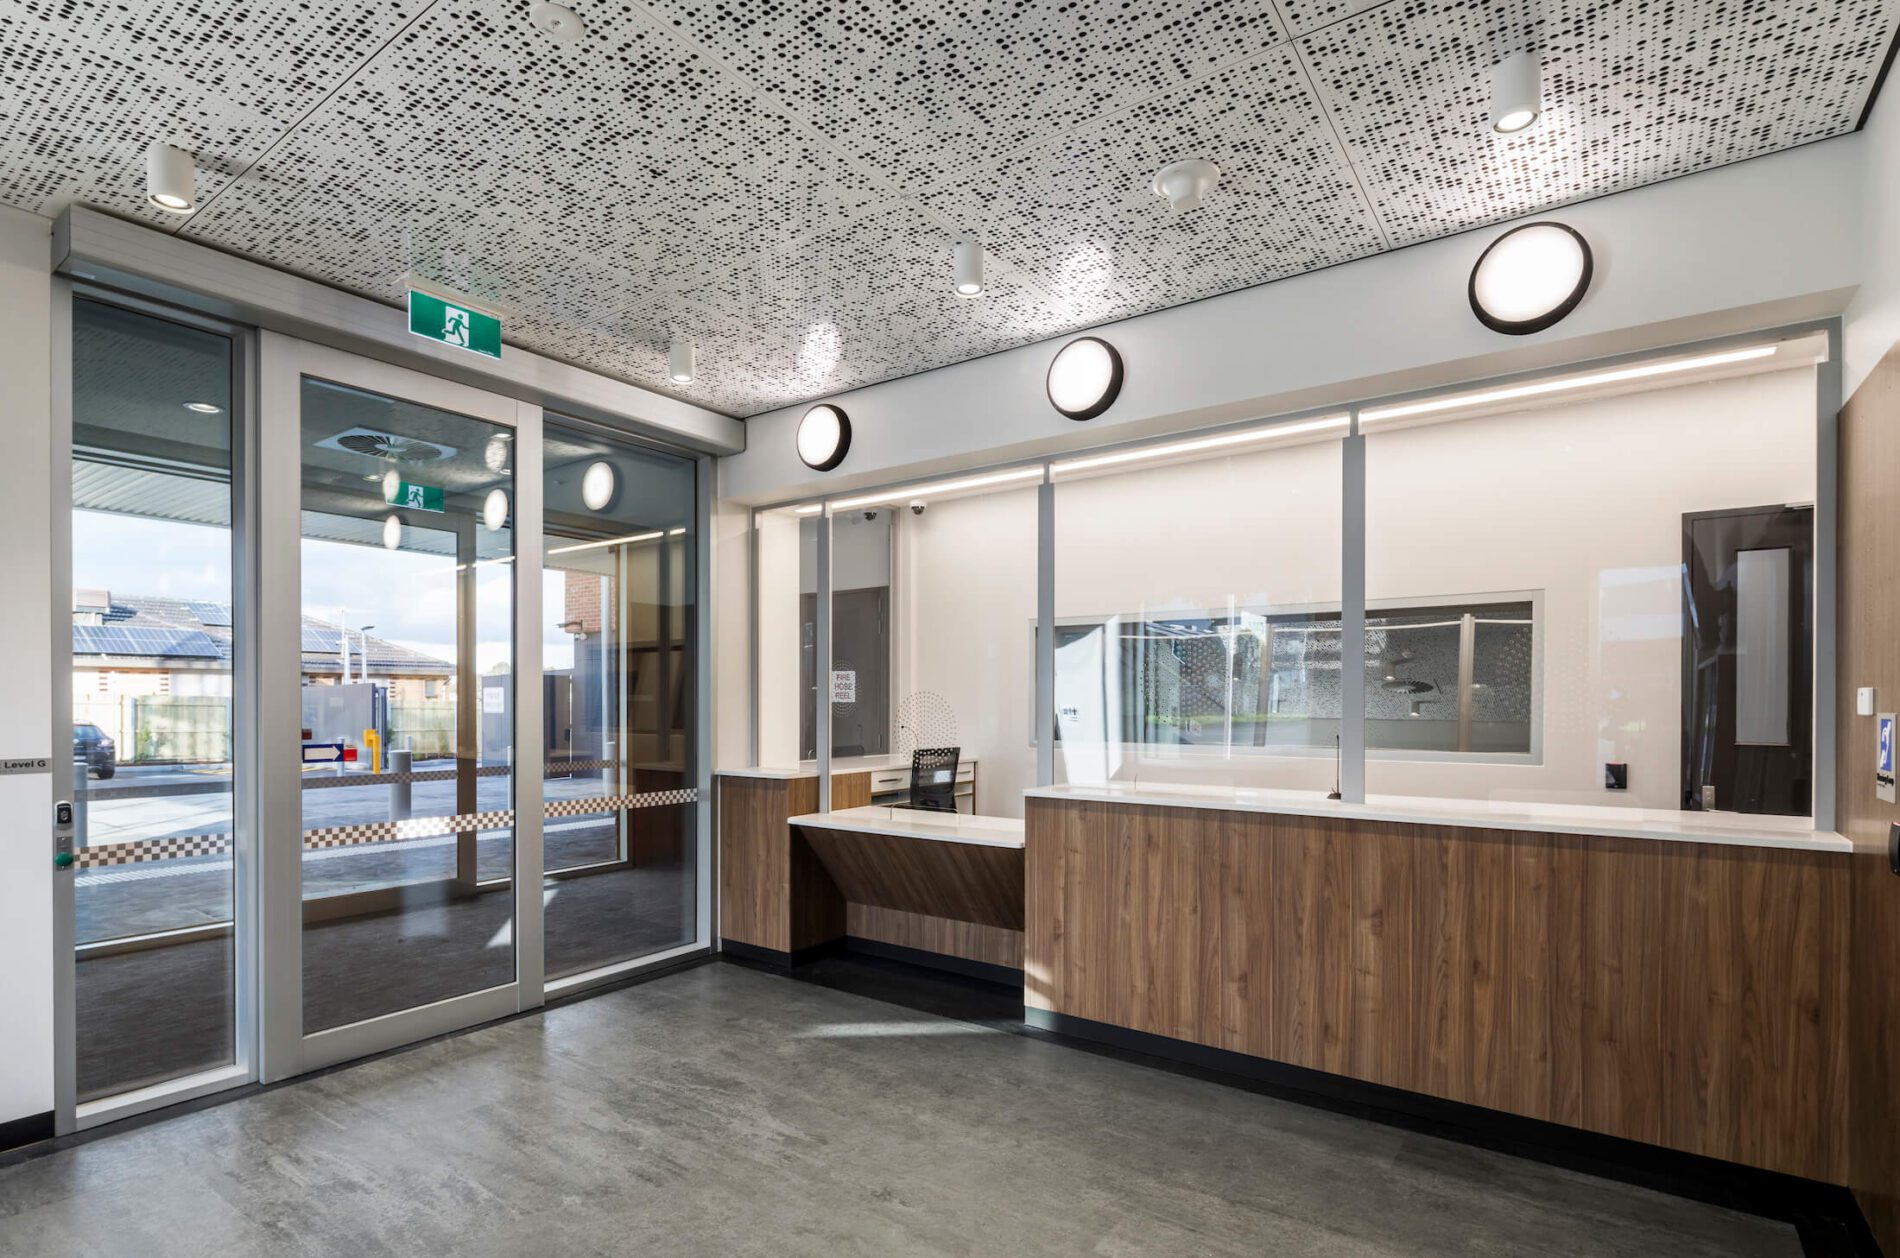 Frontline police reception area with perforated ceiling detail, timber laminate and circular lights